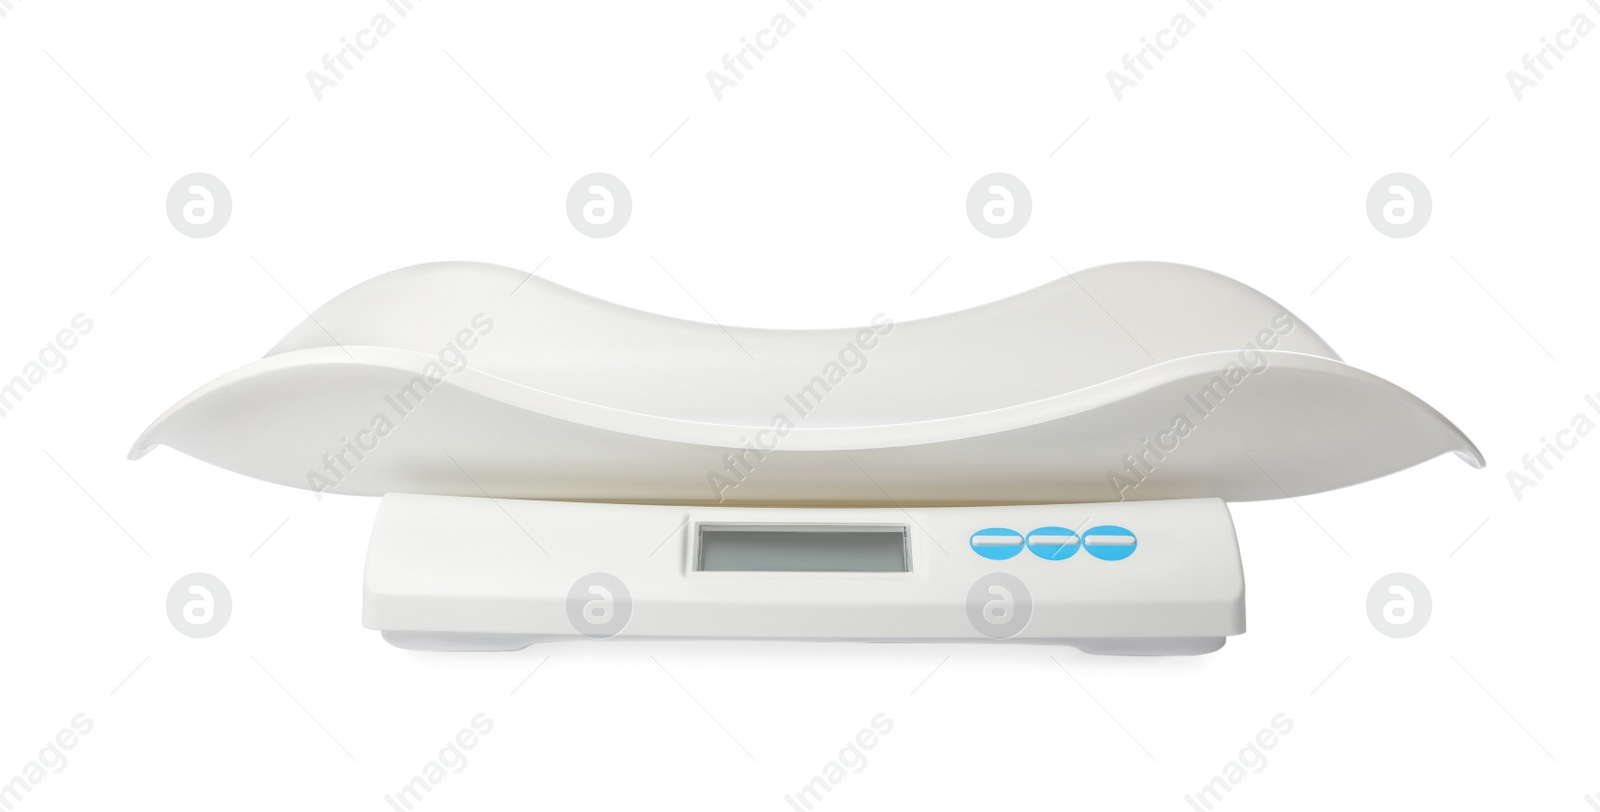 Photo of Modern digital baby scales isolated on white